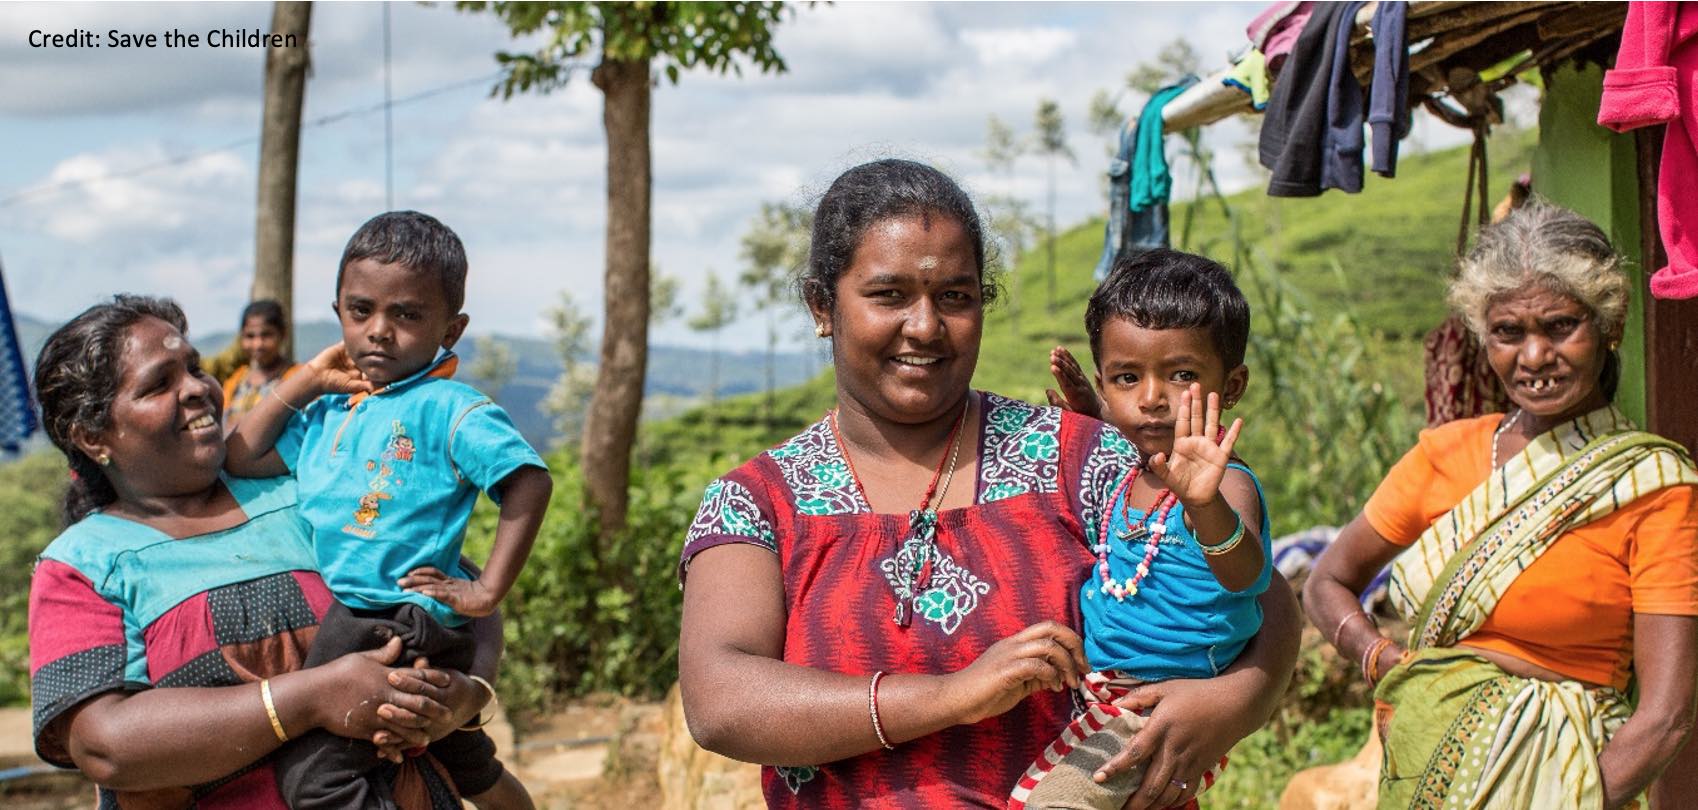 Press Release | The Wellbeing of Women and Children Prioritised in Businesses: Launching the “Mother and Child-Friendly Seal for Responsible Business”, a First for Sri Lanka